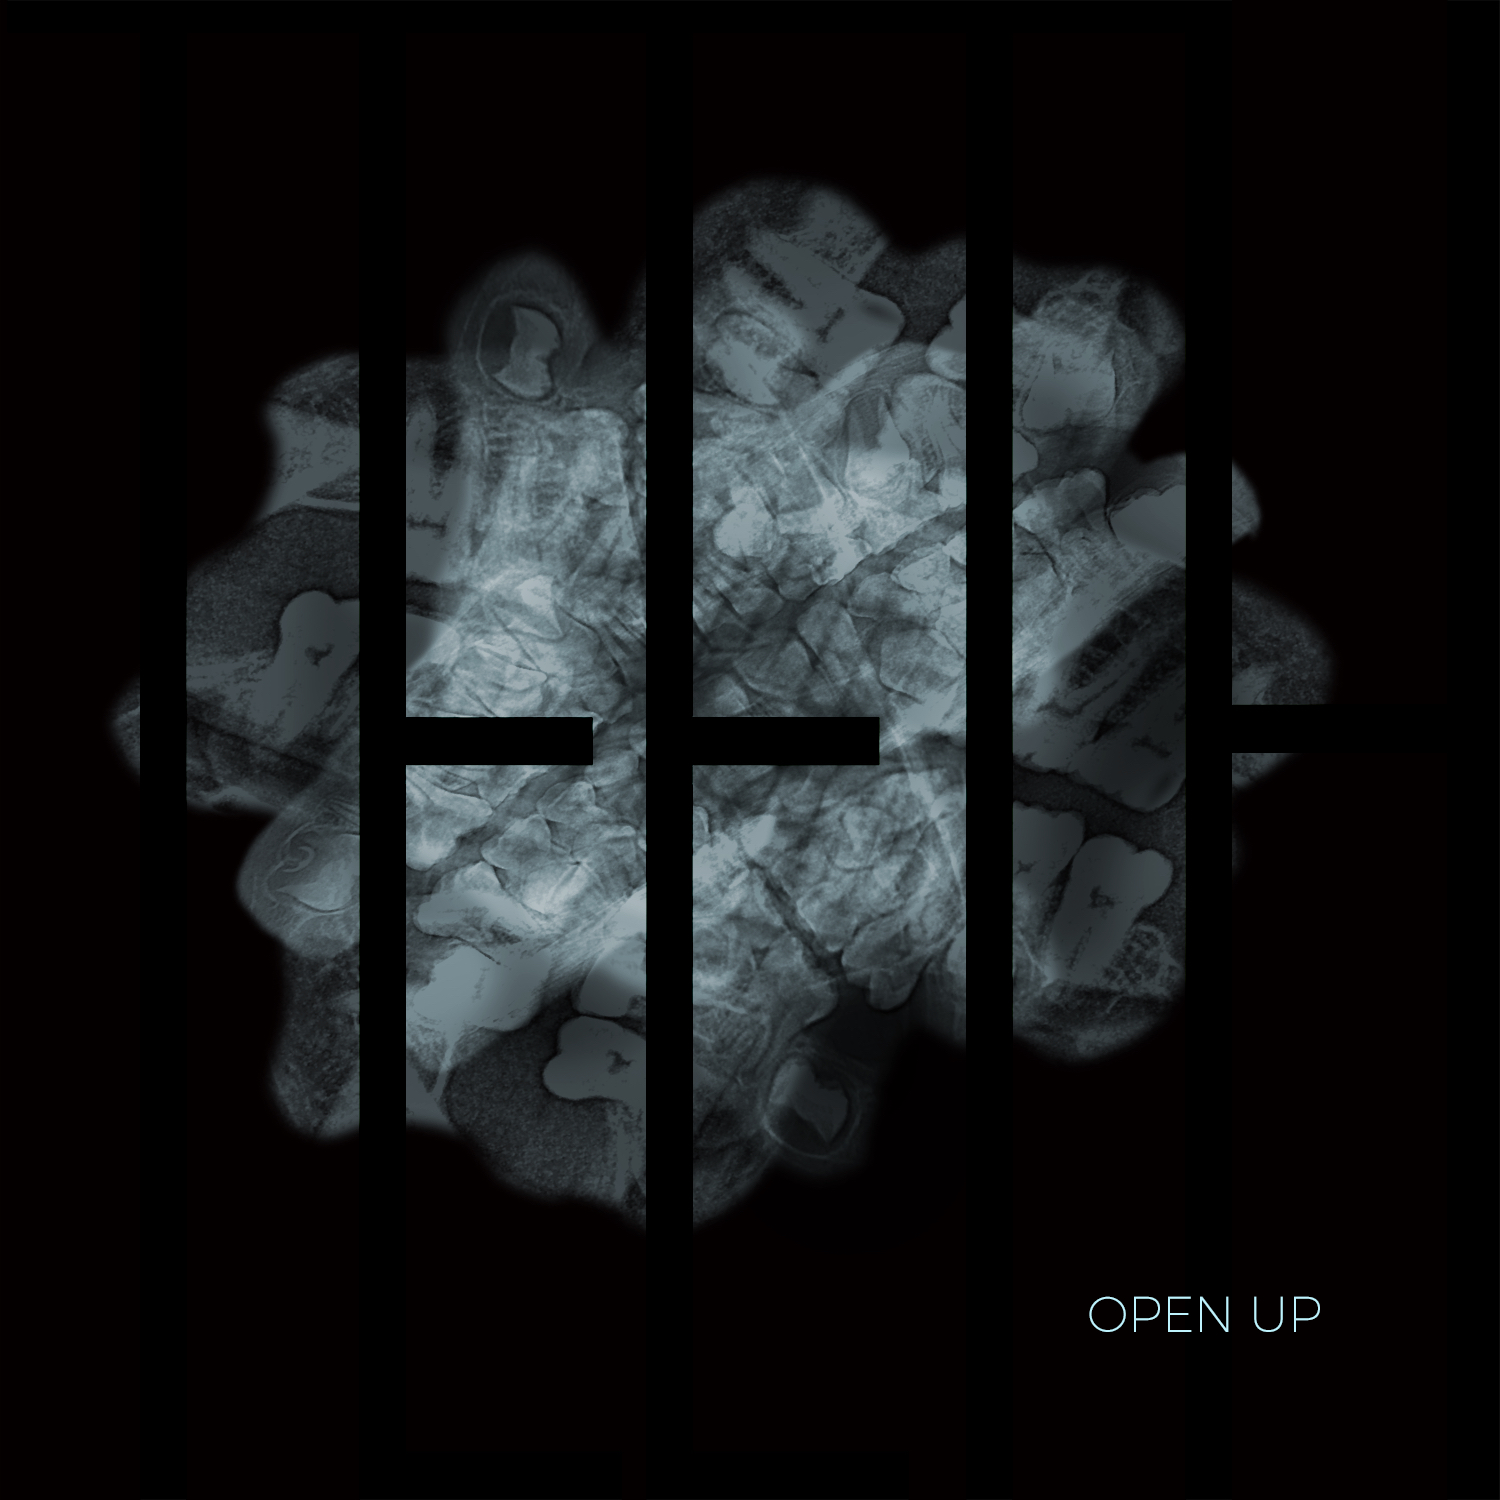 openup